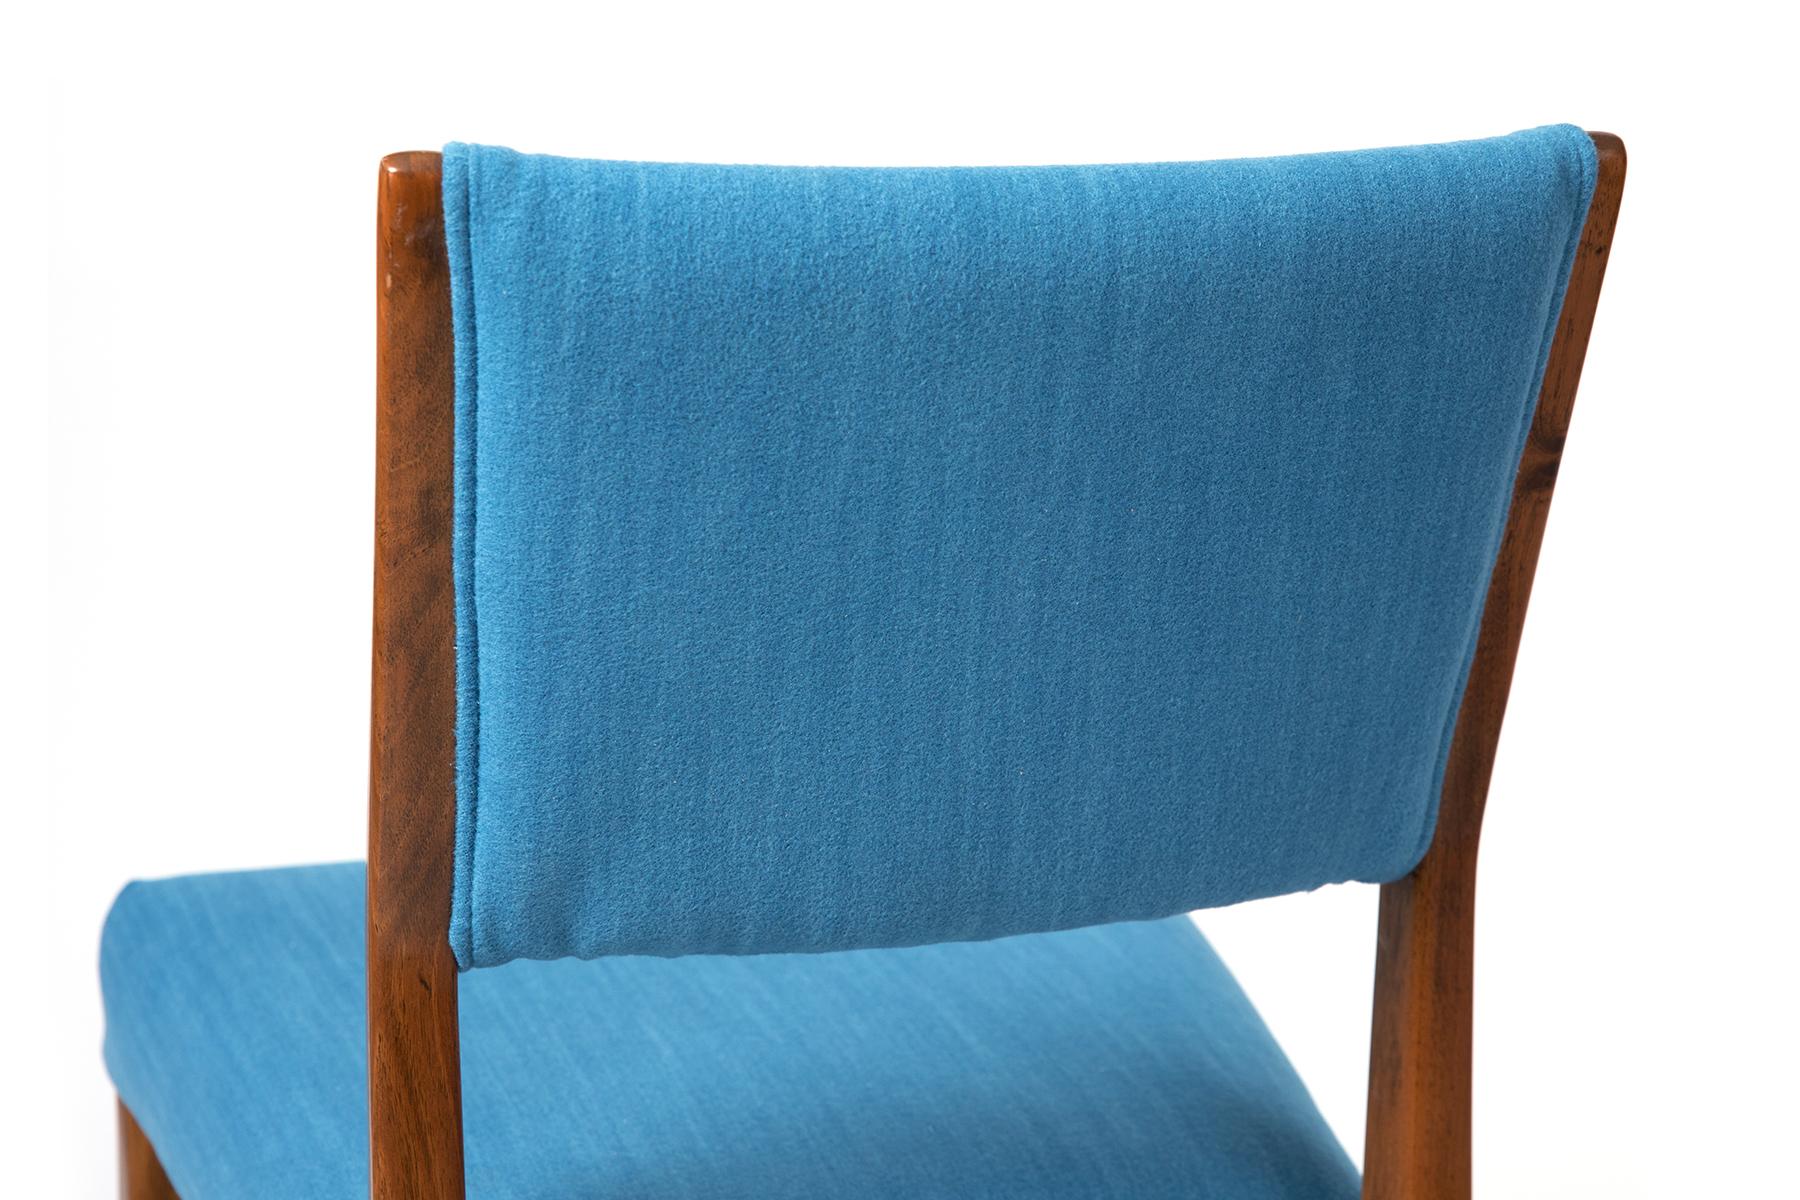 Mid-20th Century Gio Ponti Walnut Dining Chairs for Singer & Sons with Blue Upholstery, Set of 4 